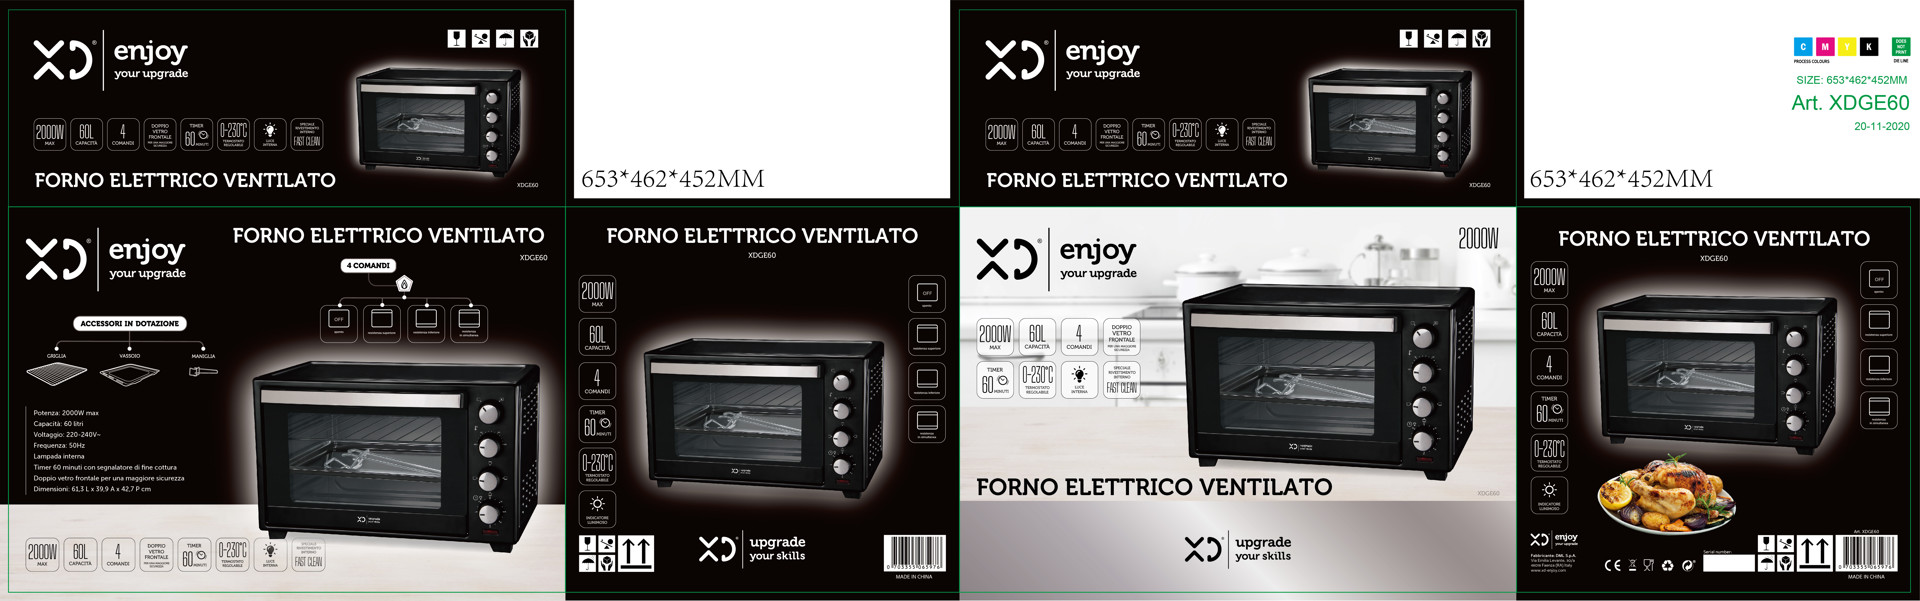 https://www.e-stayon.com/images/thumbs/0117682_xd-xdge60-forno-60-l-2000-w-nero.jpeg